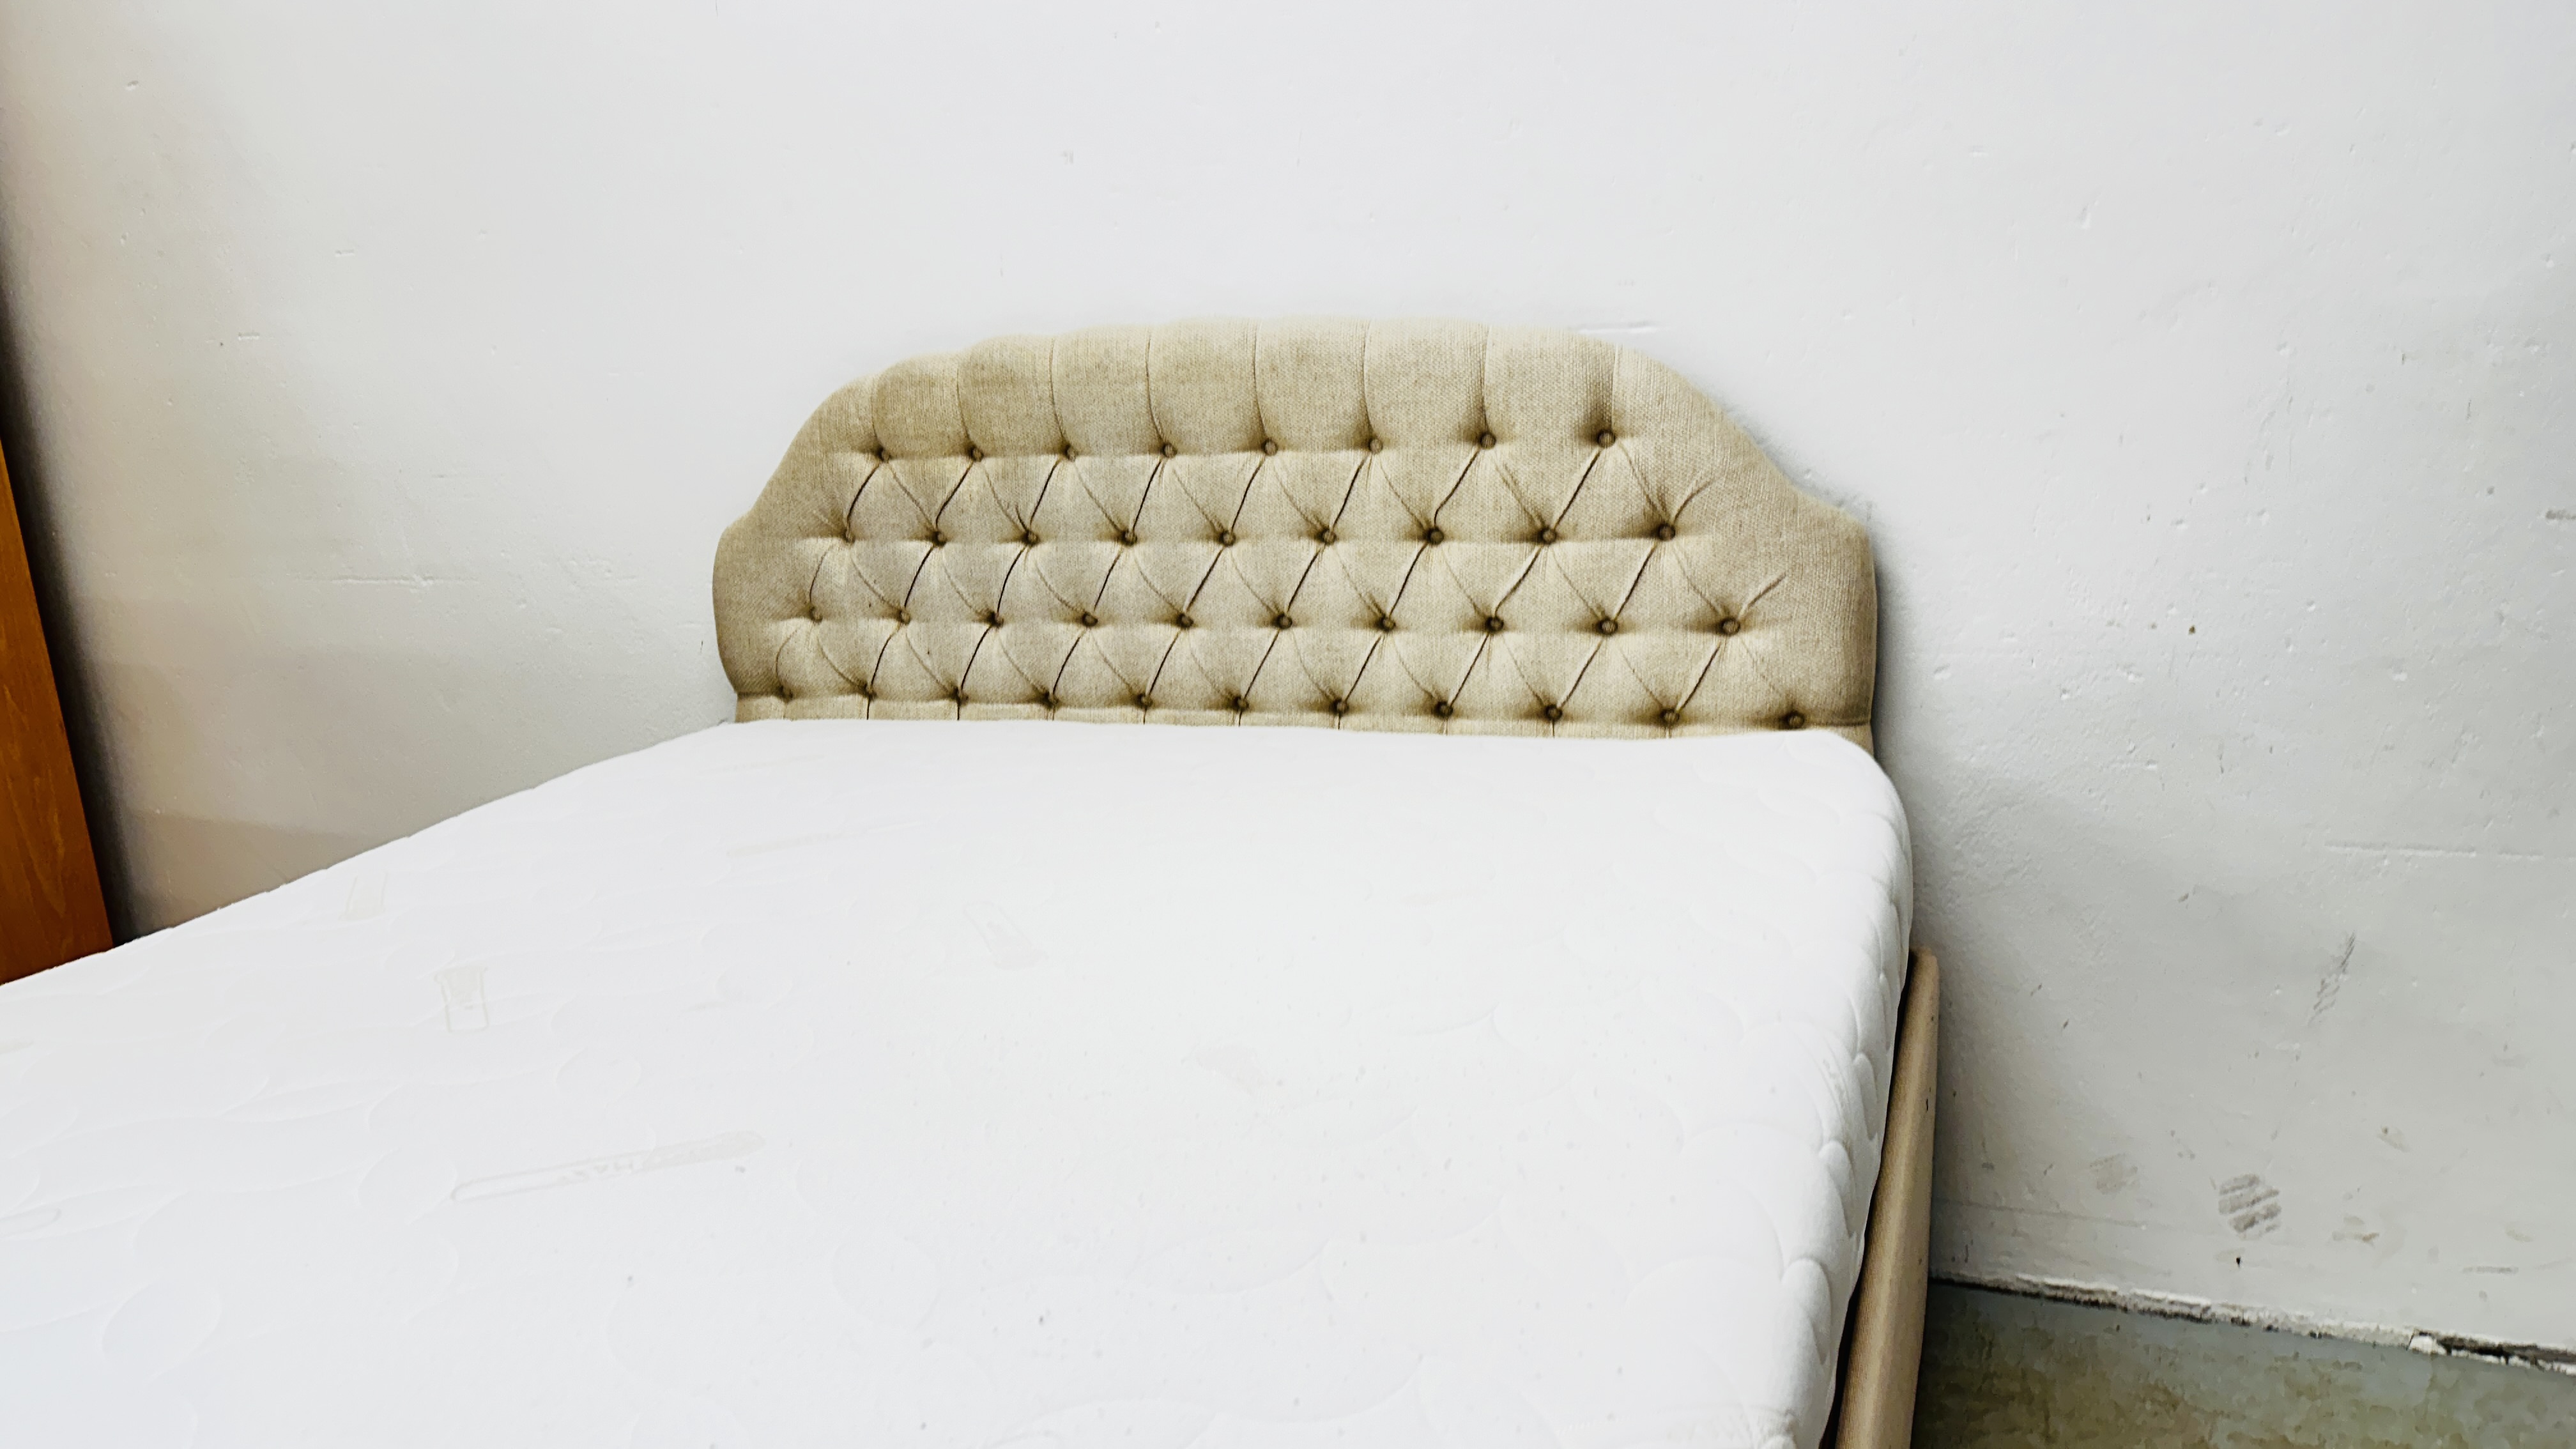 AN ELECTRICALLY ADJUSTABLE DOUBLE BED WITH COOLMAX MATTRESS AND OATMEAL UPHOLSTERED STEWART JONES - Image 15 of 16